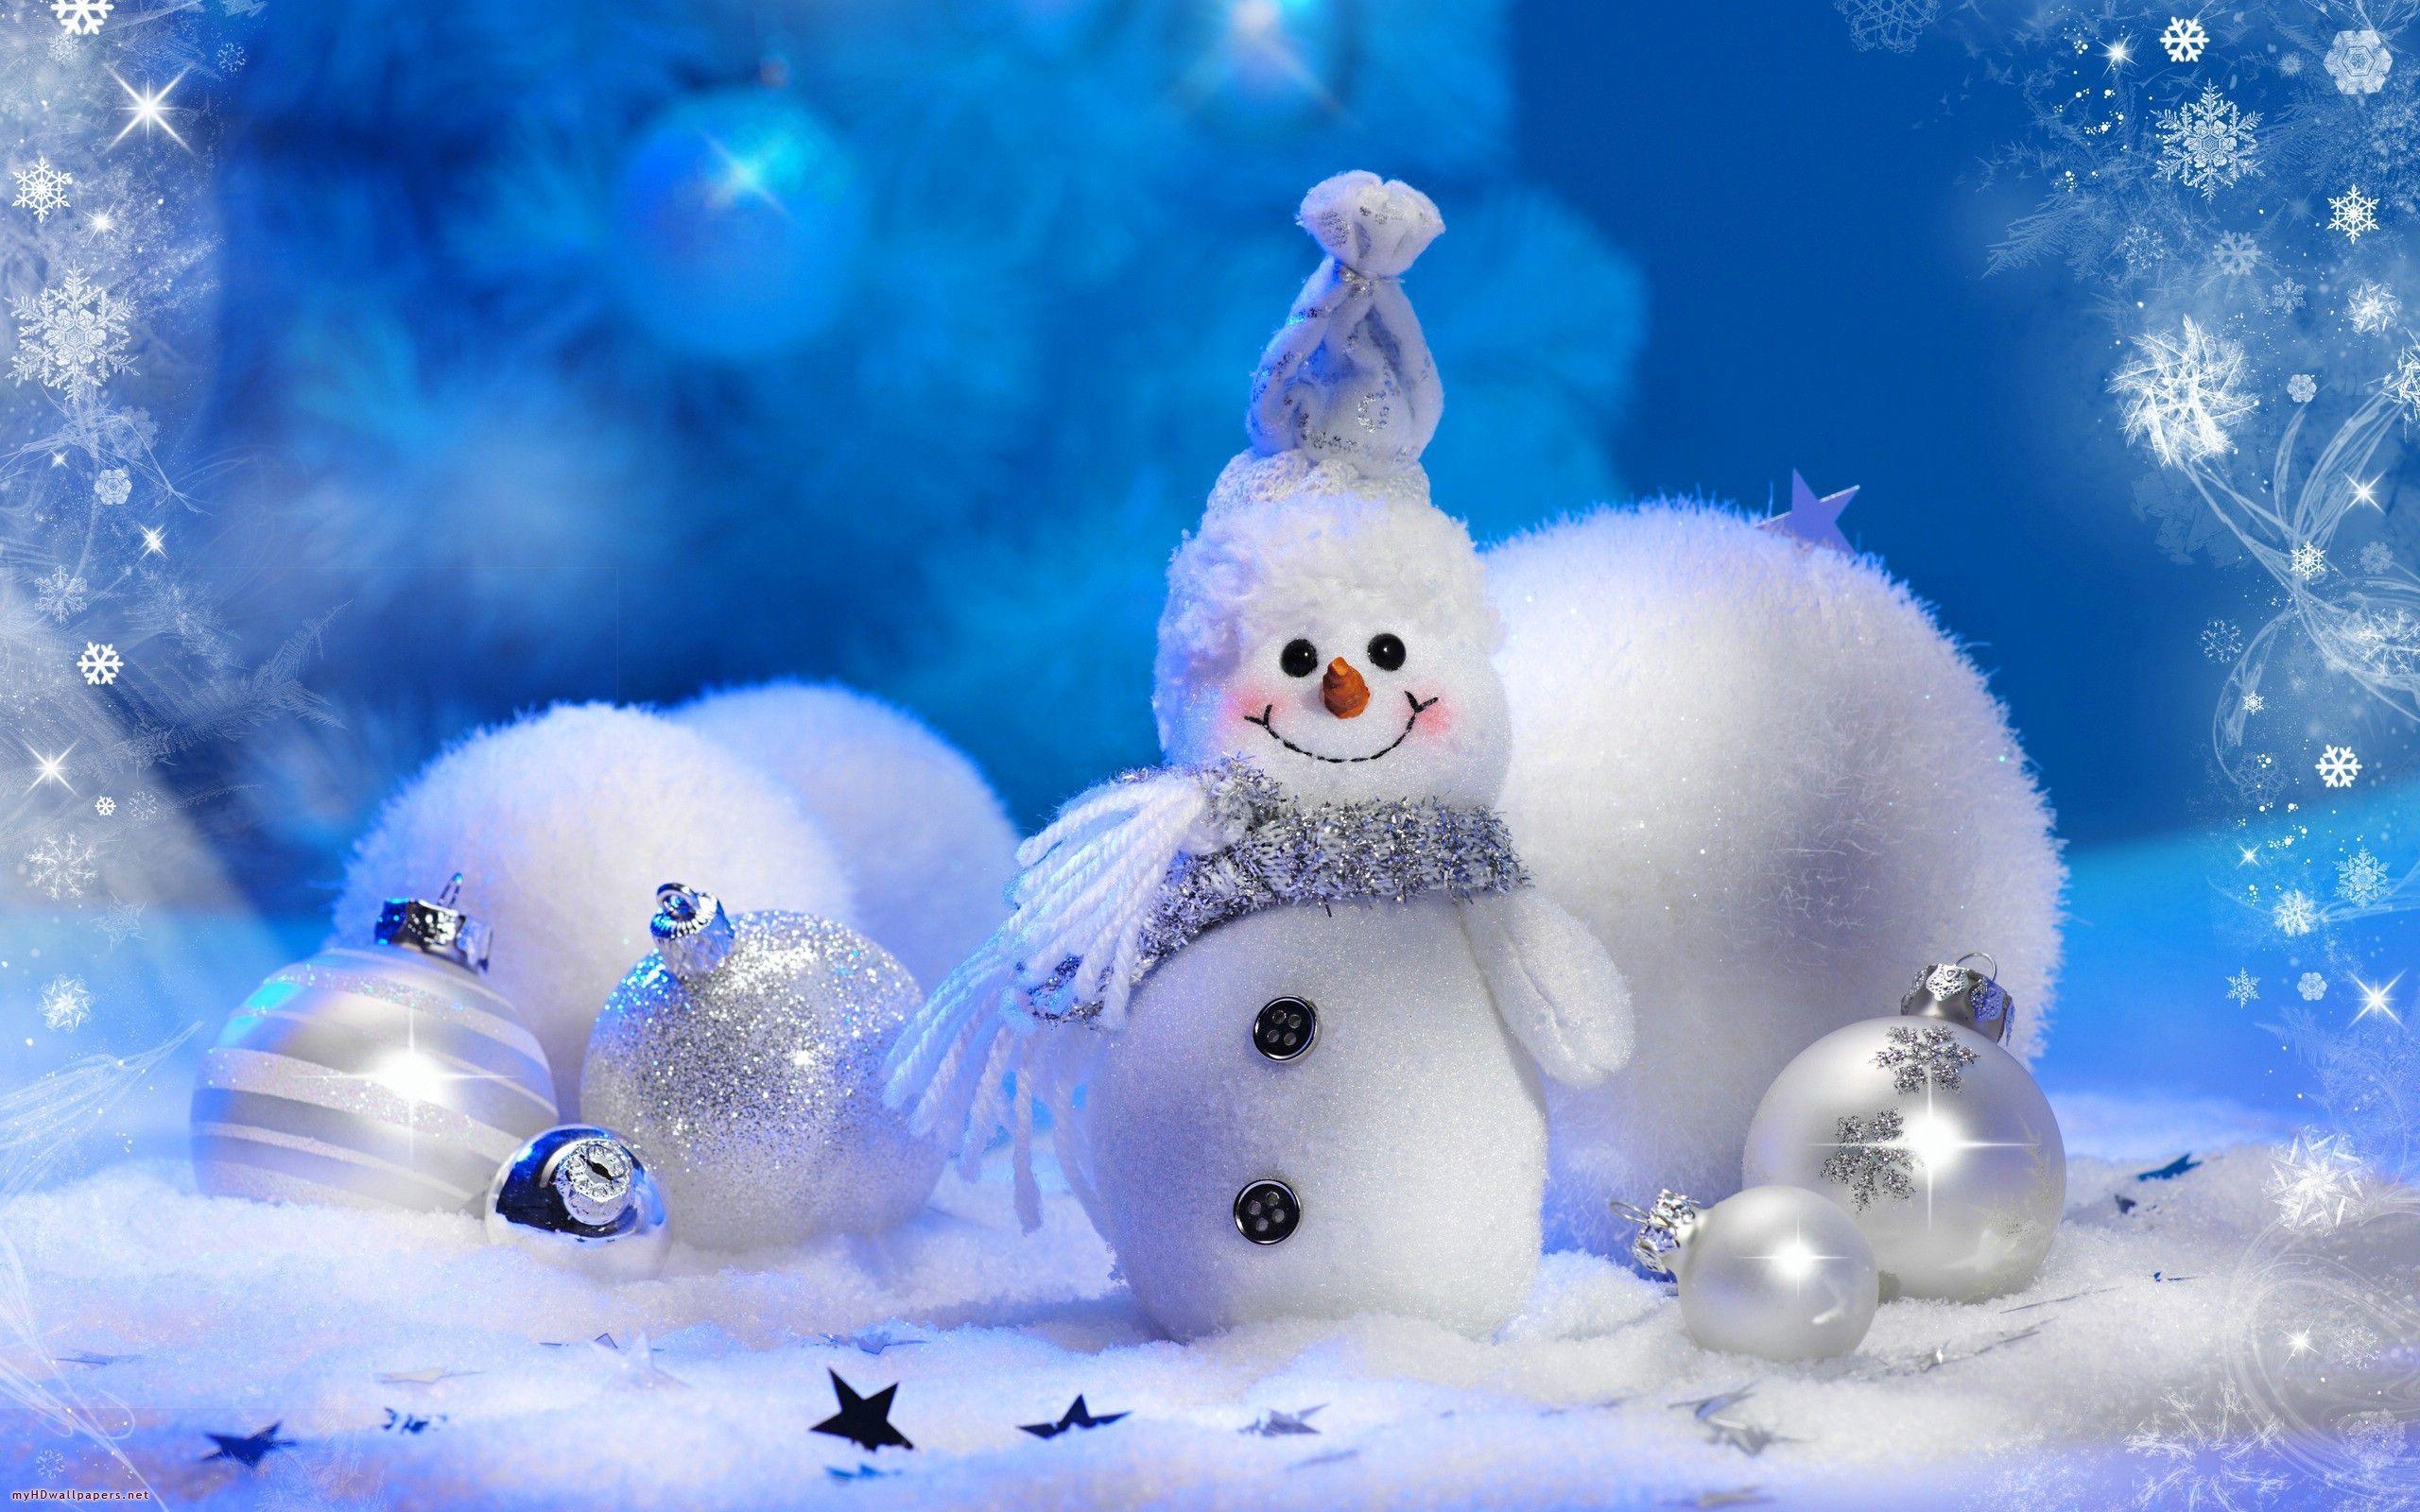 Related Picture Funny Snowman Wallpaper Free Desktop Background